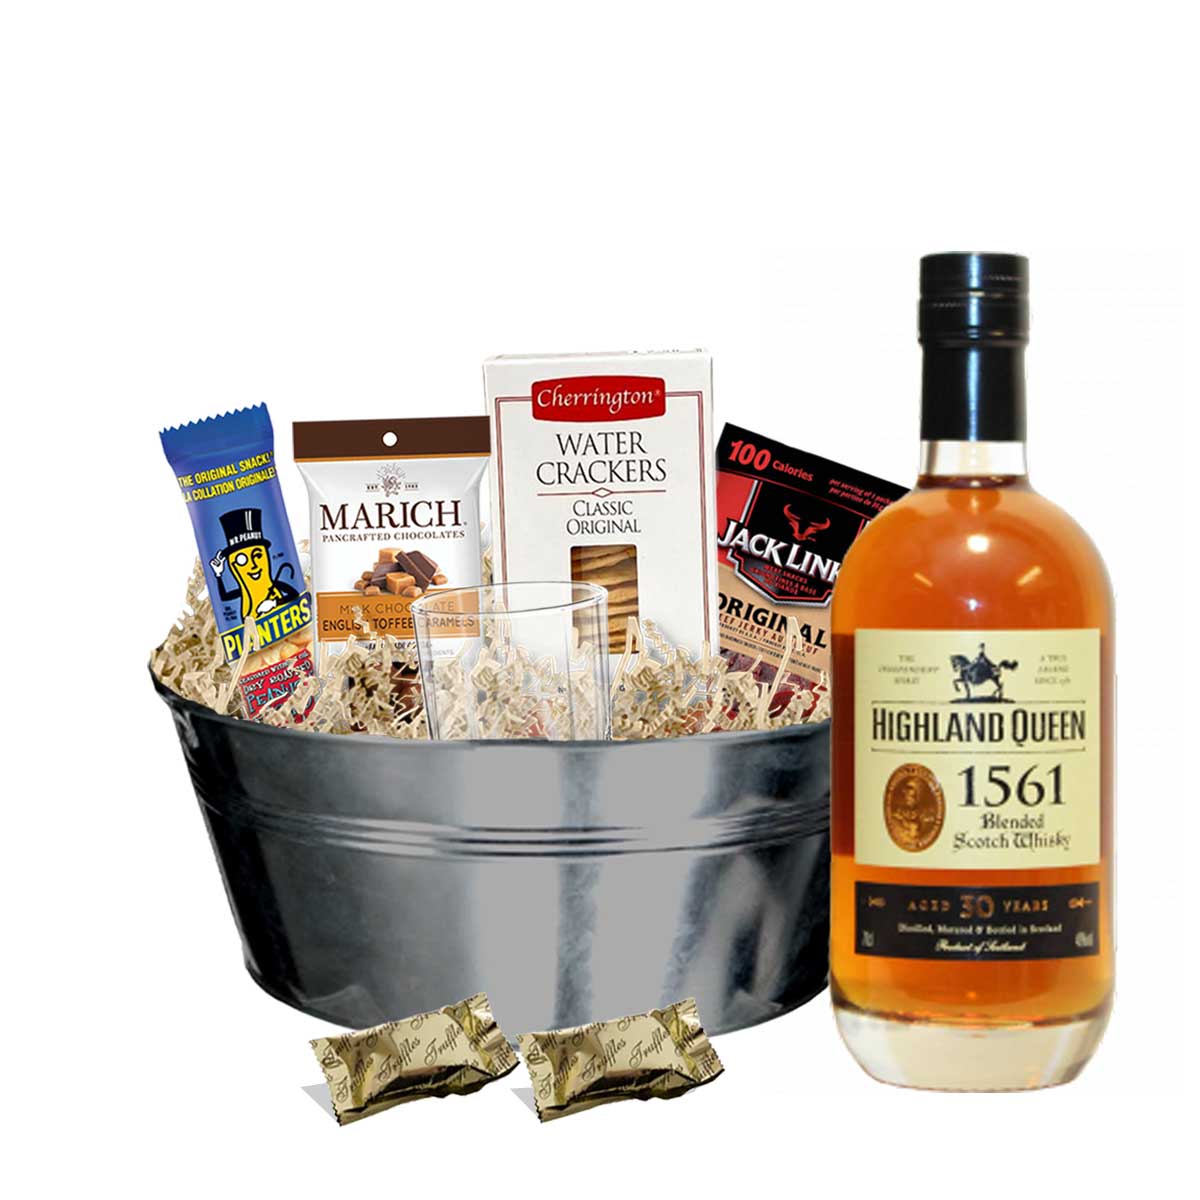 TAG Liquor Stores BC - Highland Queen 30 Year Old Blended Scotch Whisky 750ml Gift Basket